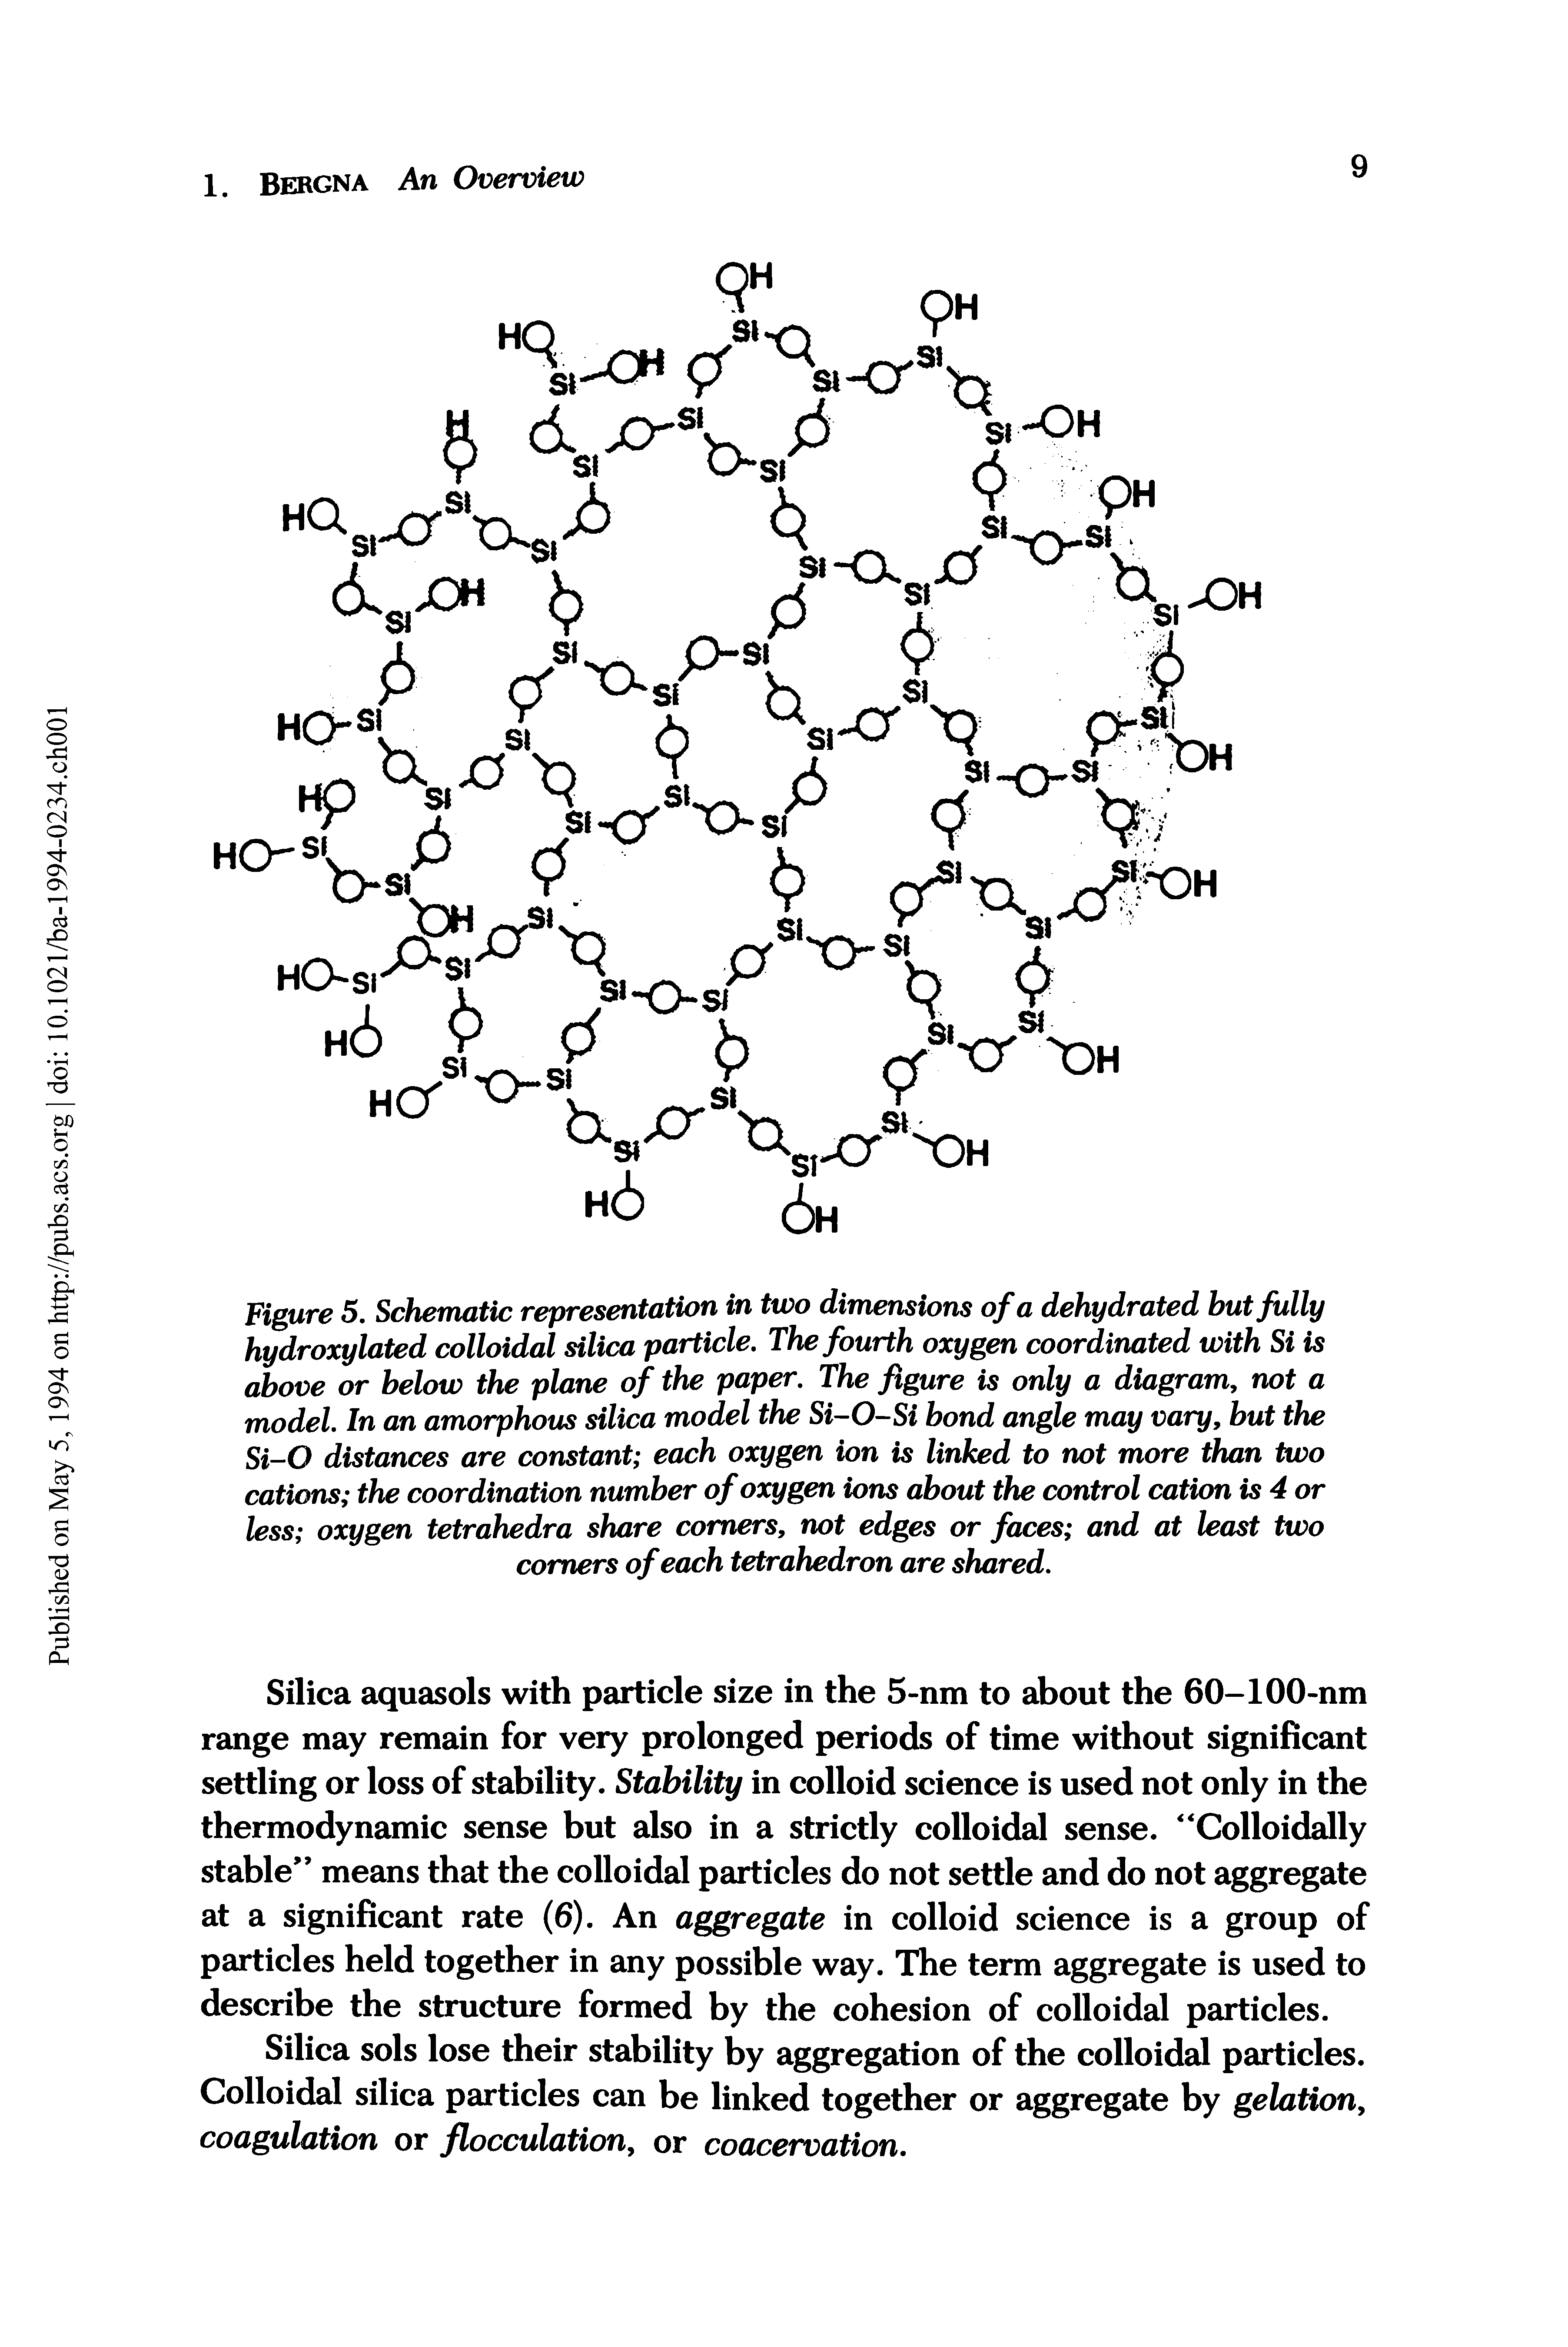 Figure 5. Schematic representation in two dimensions of a dehydrated but fully hydroxylated colloidal silica particle. The fourth oxygen coordinated with Si is above or below the plane of the paper. The figure is only a diagram, not a model. In an amorphous silica model the Si-O-Si bond angle may vary, but the Si-O distances are constant each oxygen ion is linked to not more than two cations the coordination number of oxygen ions about the control cation is 4 or less oxygen tetrahedra share comers, not edges or faces and at least two comers of each tetrahedron are shared.